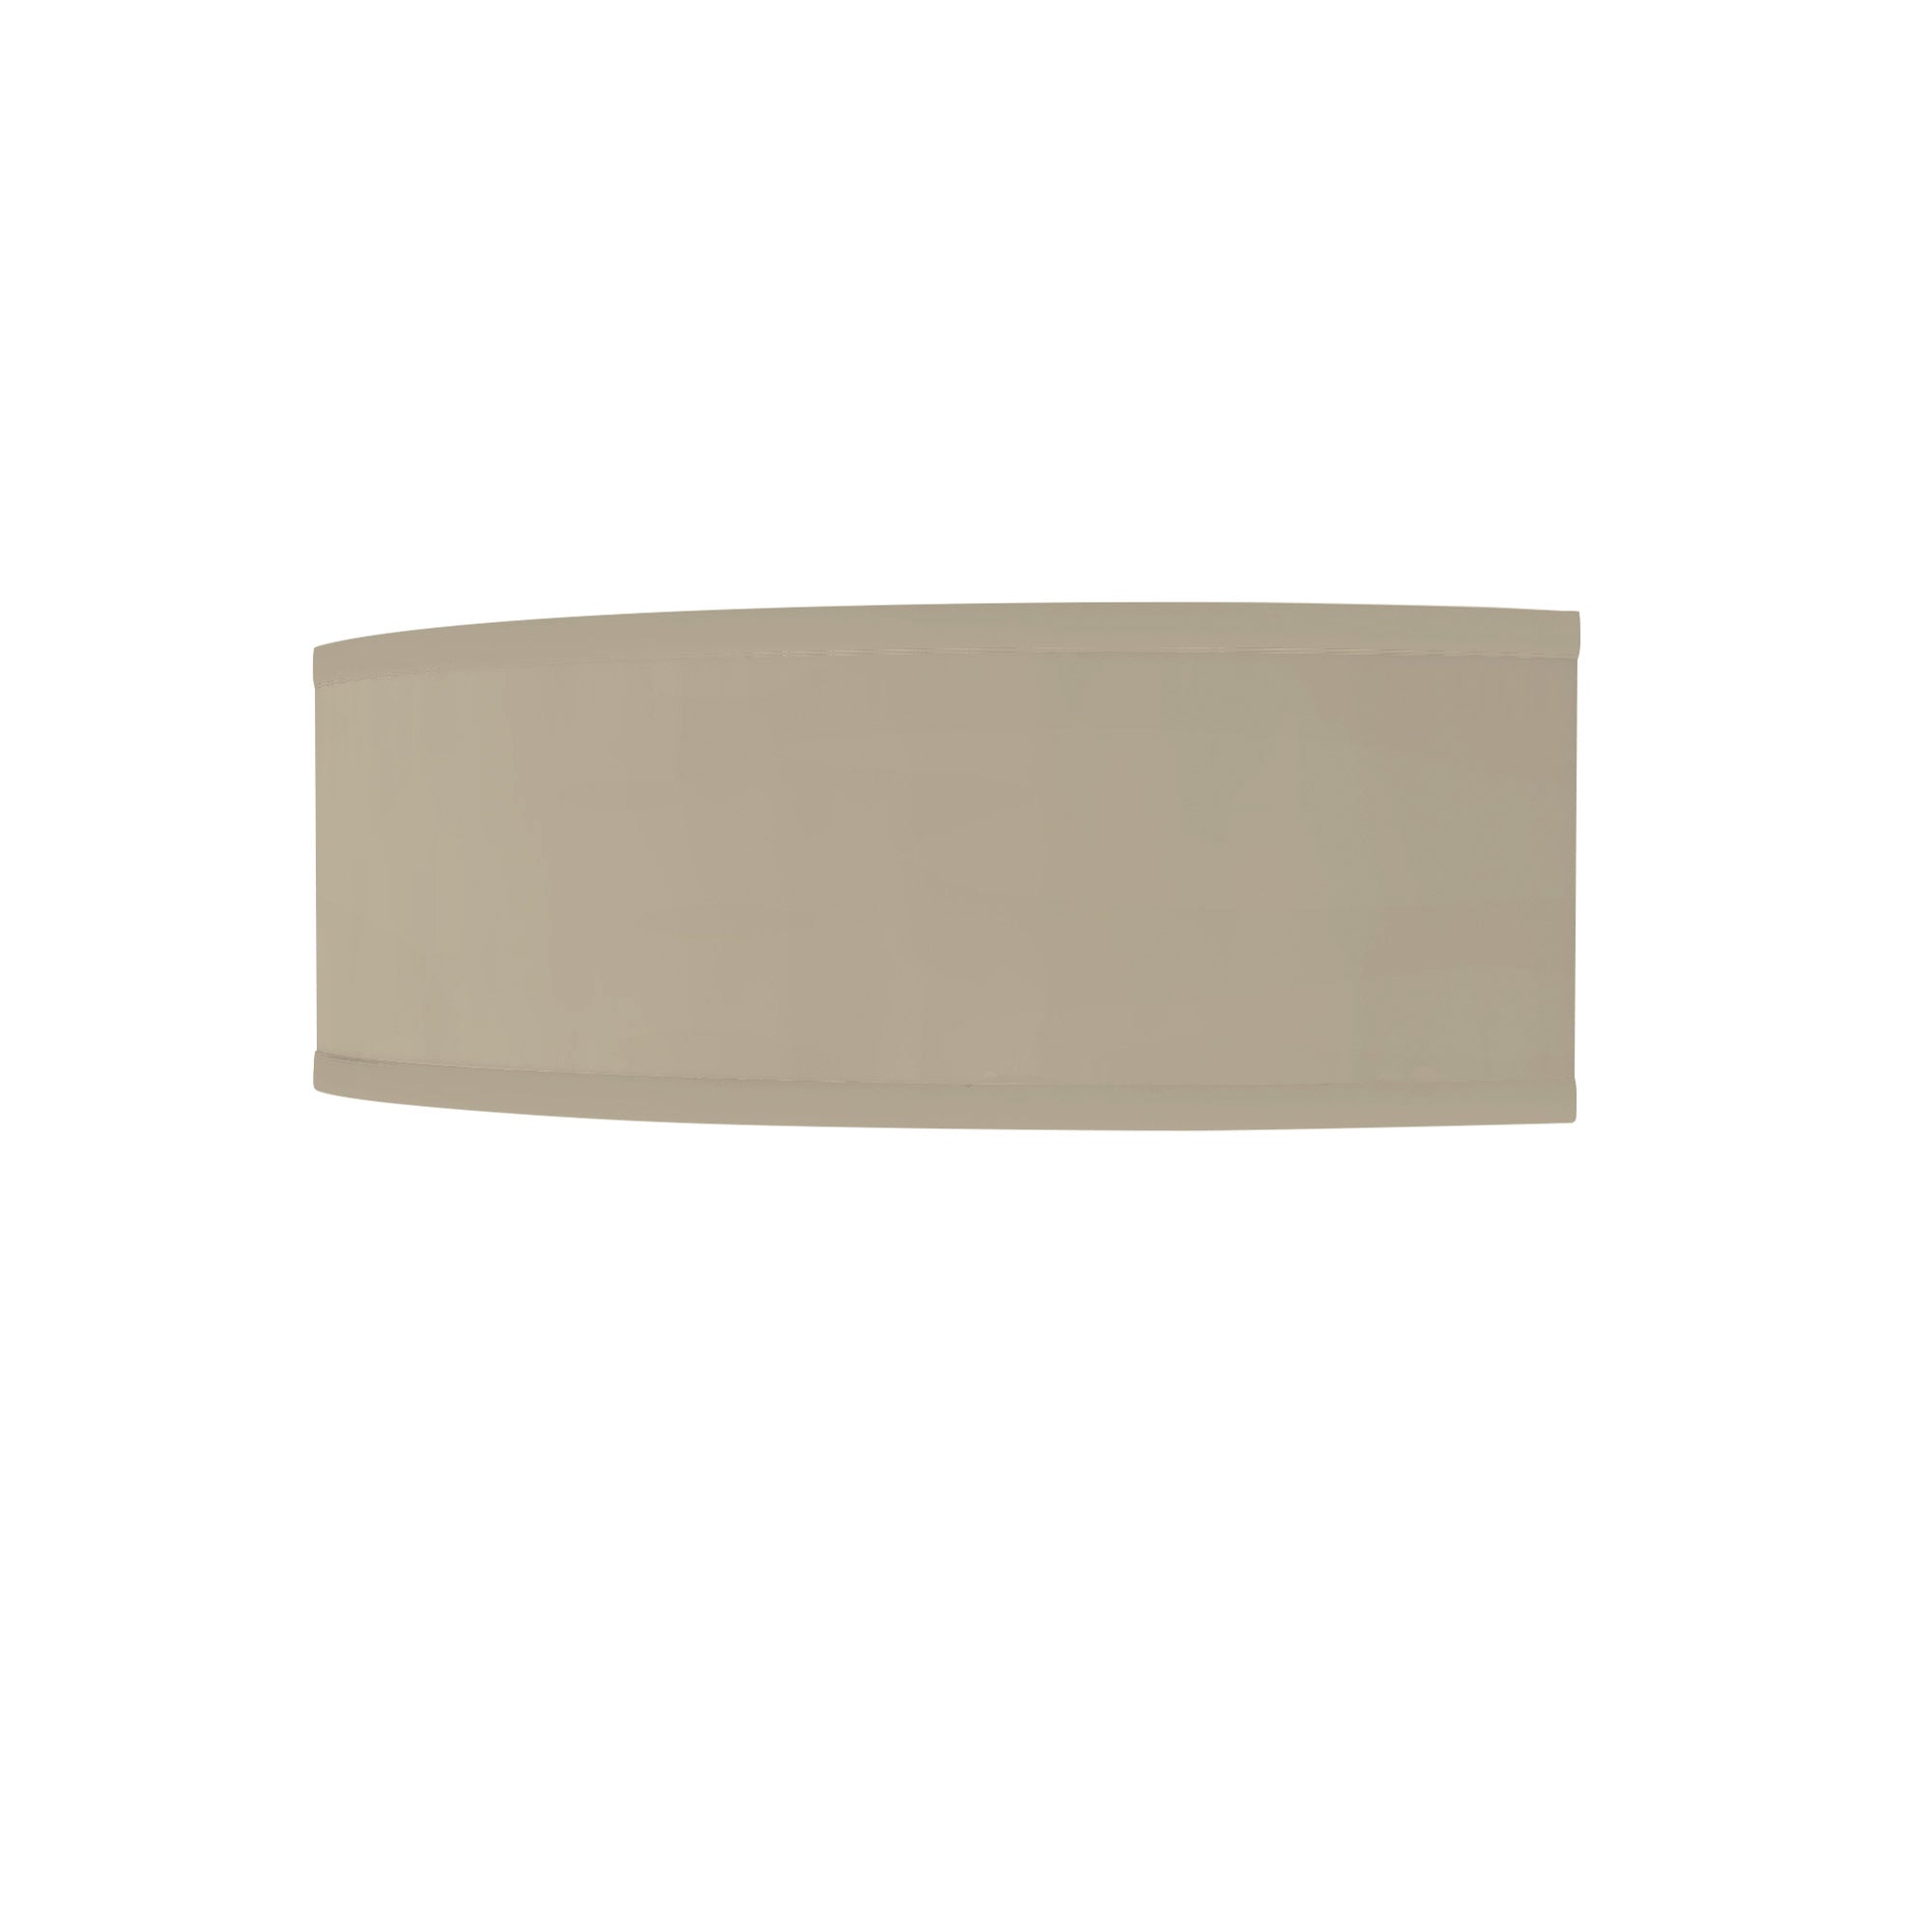 The Mora Wall Sconce from Seascape Fixtures with a linen shade in tan color.